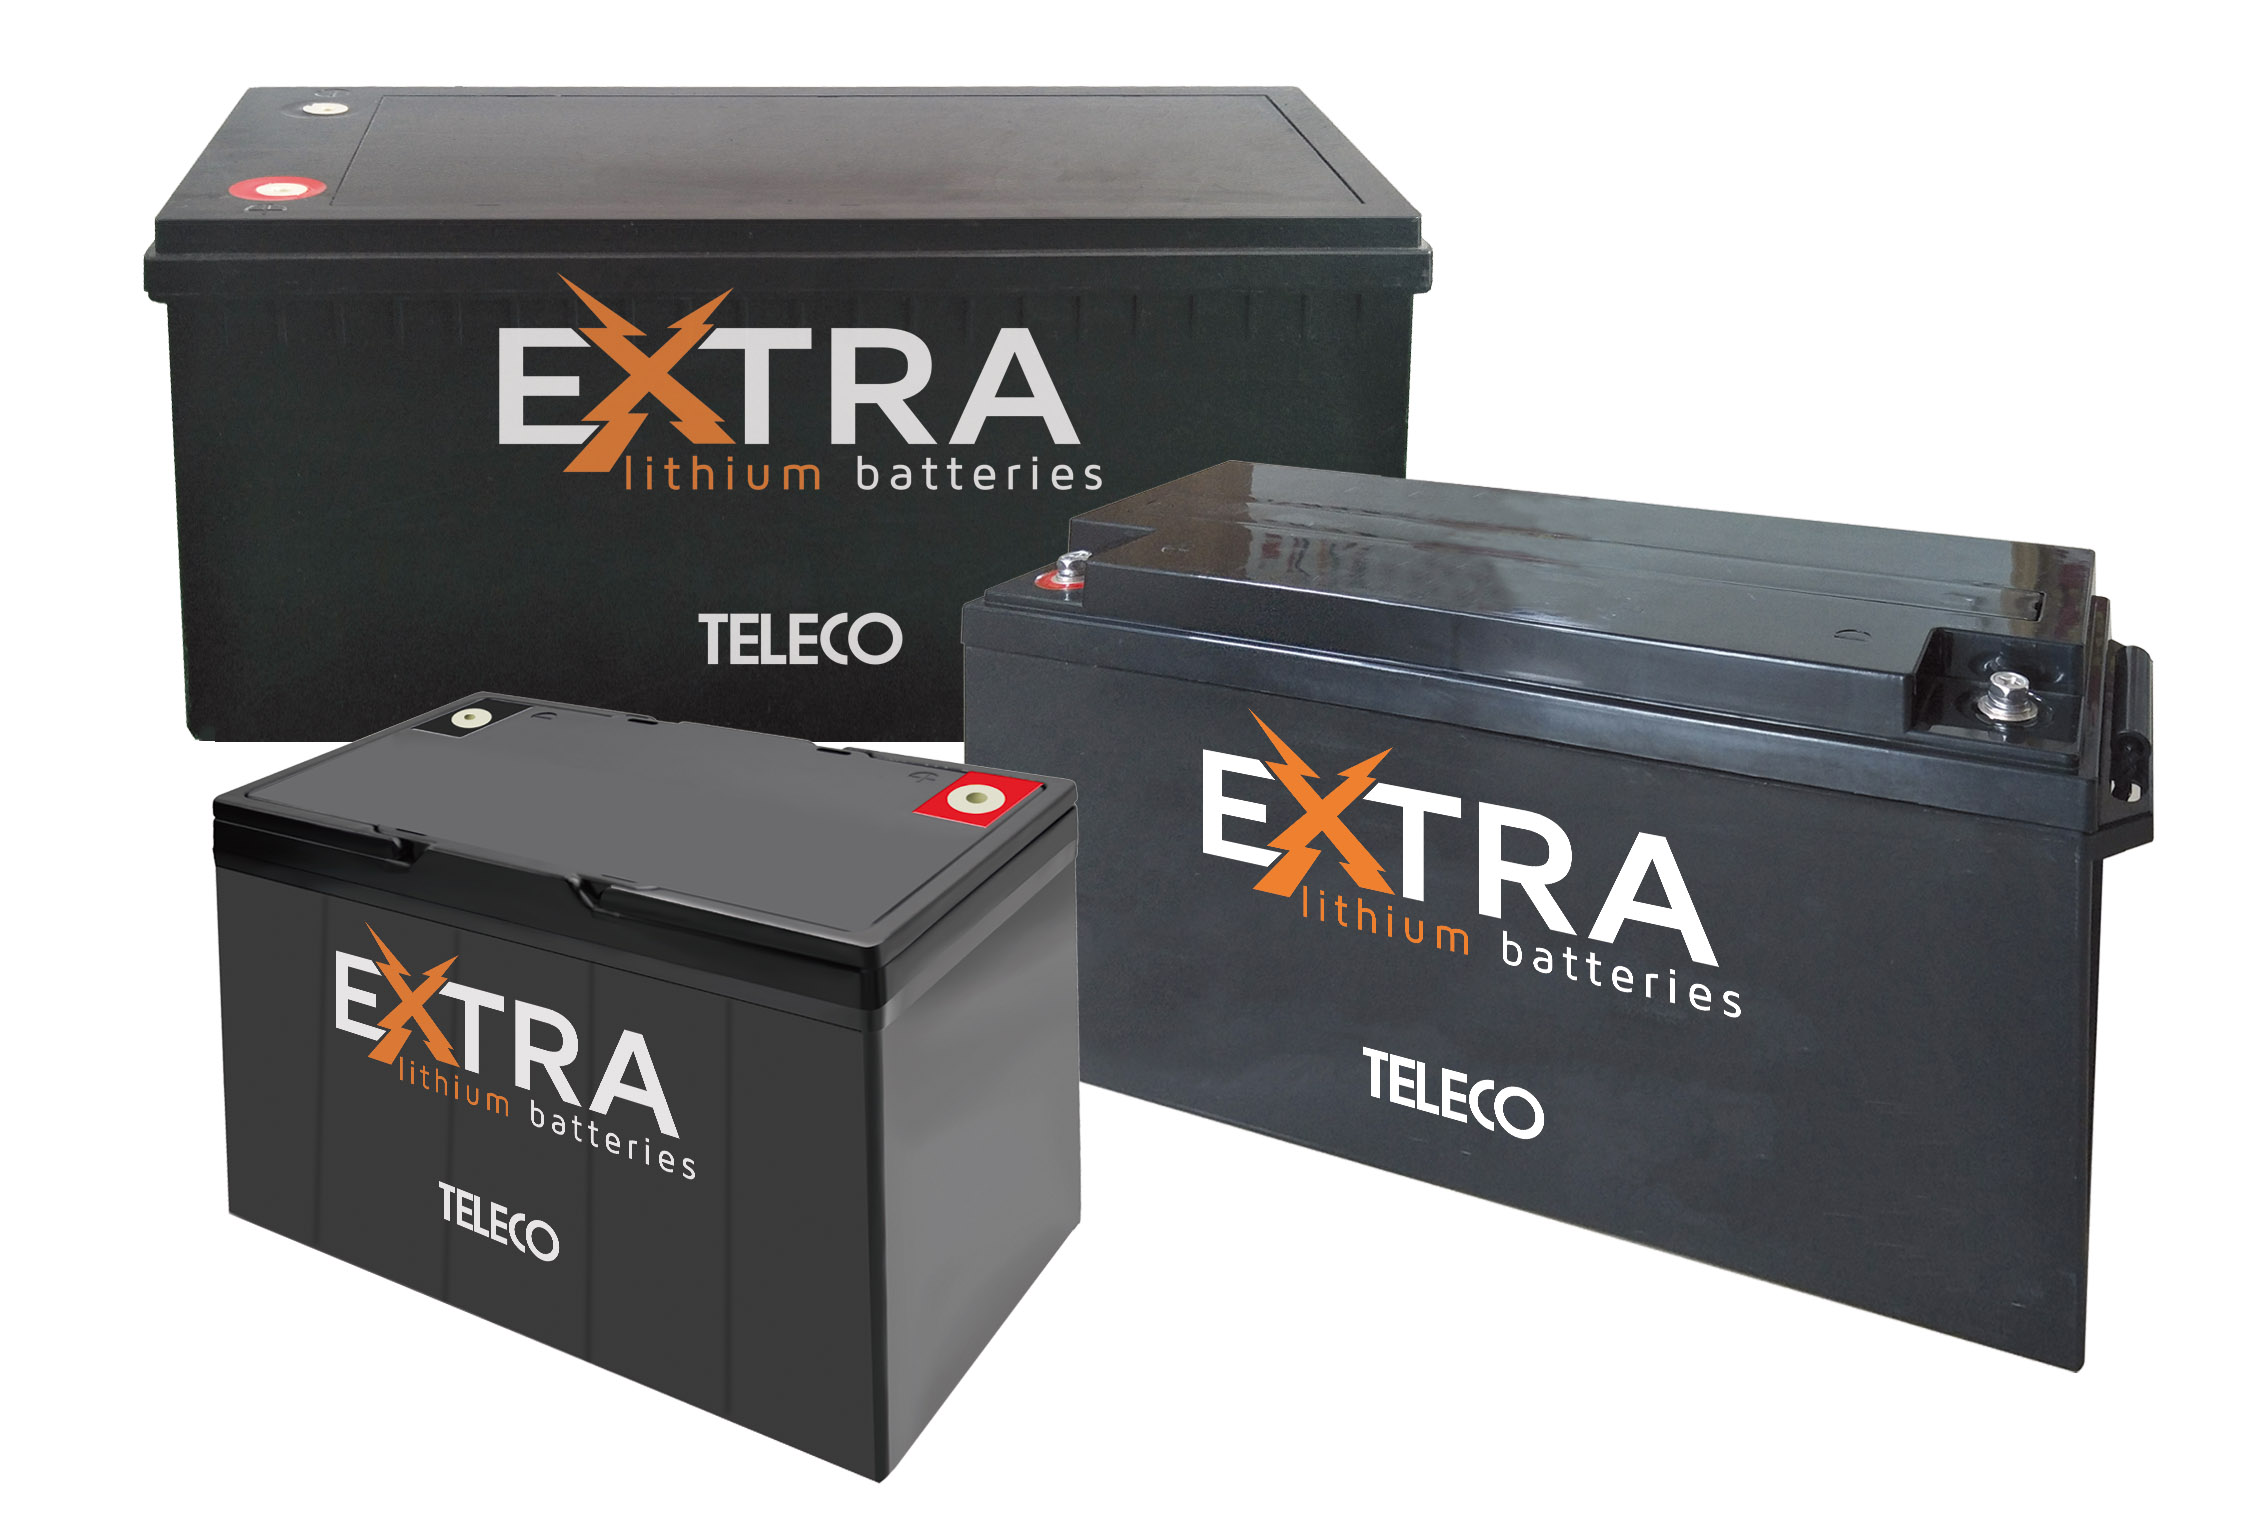 TELECO presents its range of Lithium batteries (LiFePO4) for recreational vehicles